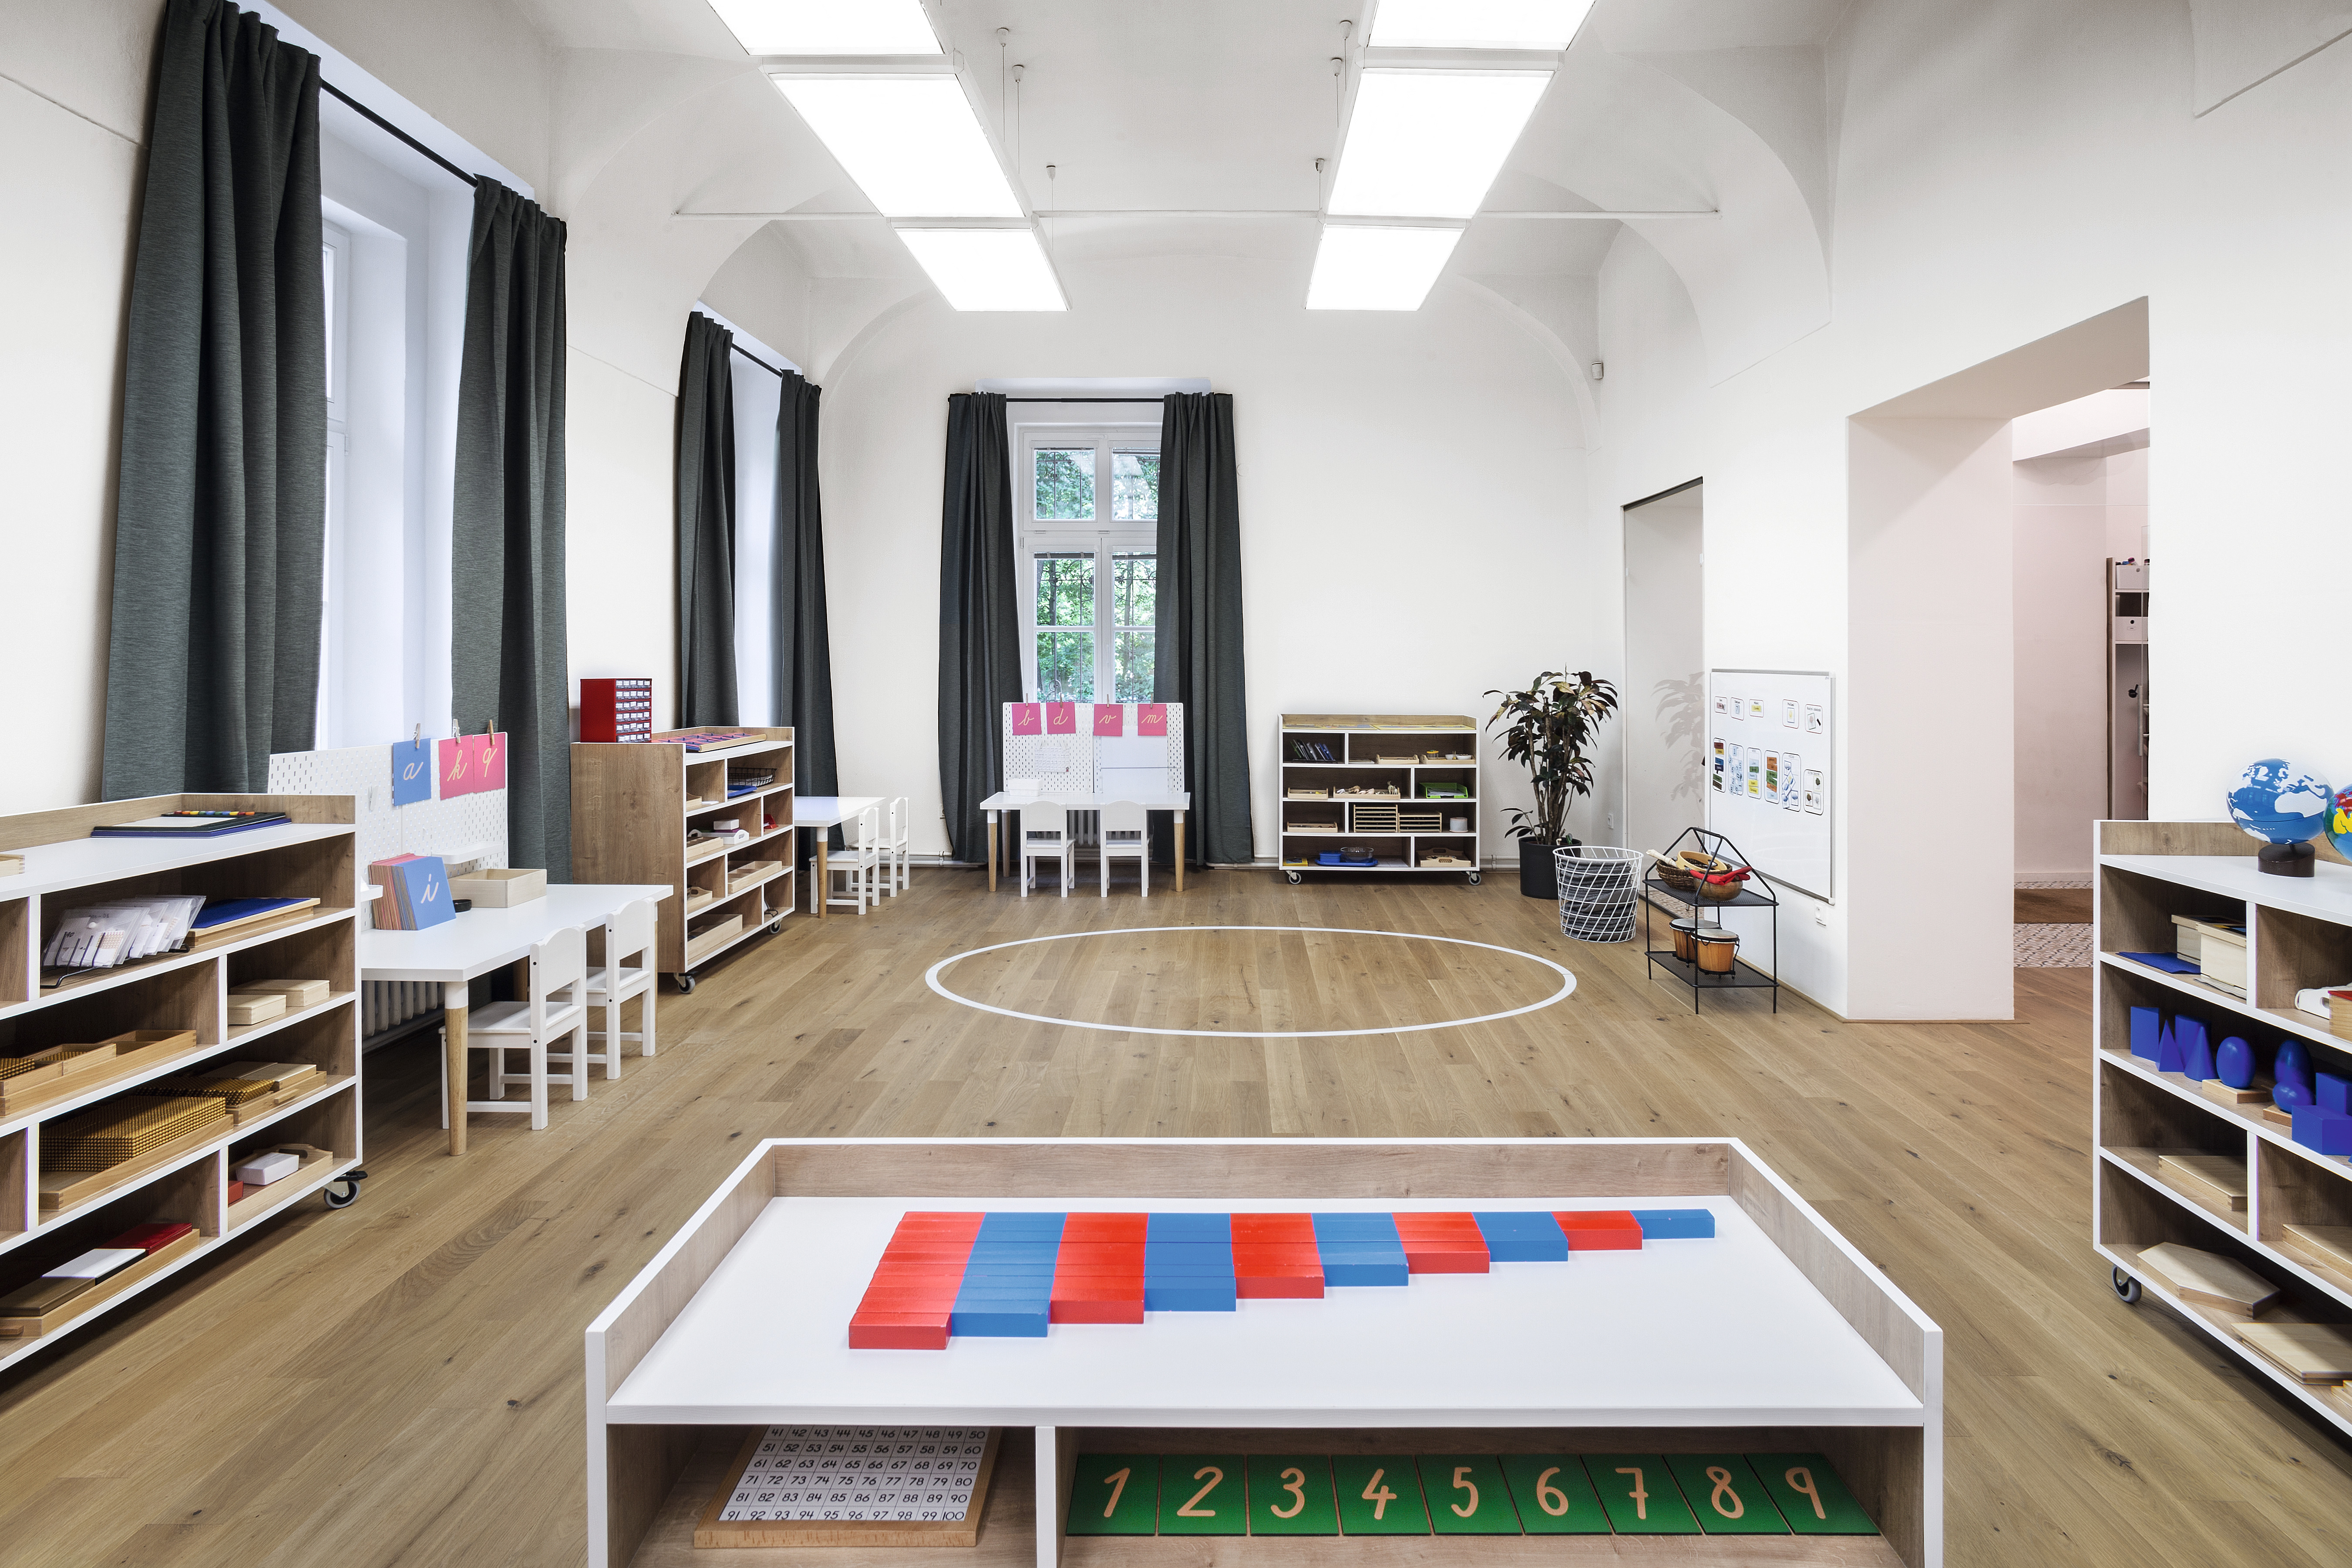 The new play areas develop creativity in the children at the kindergarten.